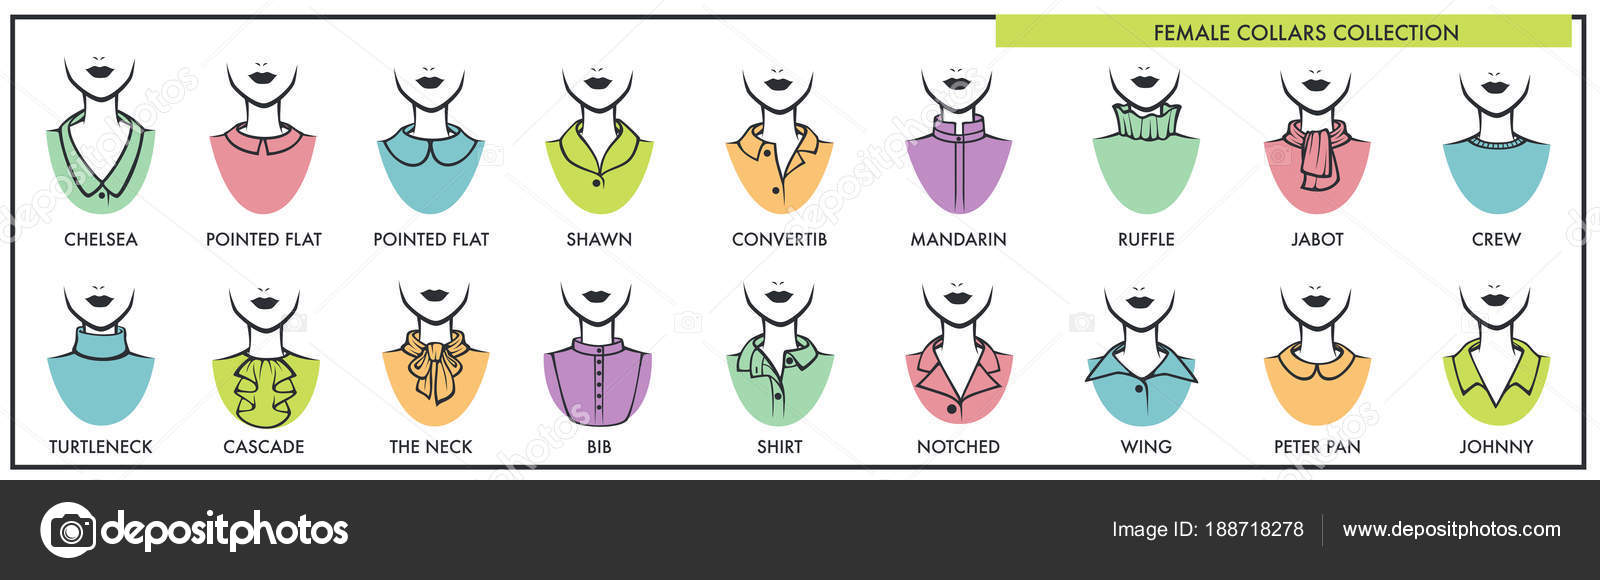 Collars All Kinds Tops Collection Names Womens Fashion Elements Stock Image ©Sonulkaster #188718278